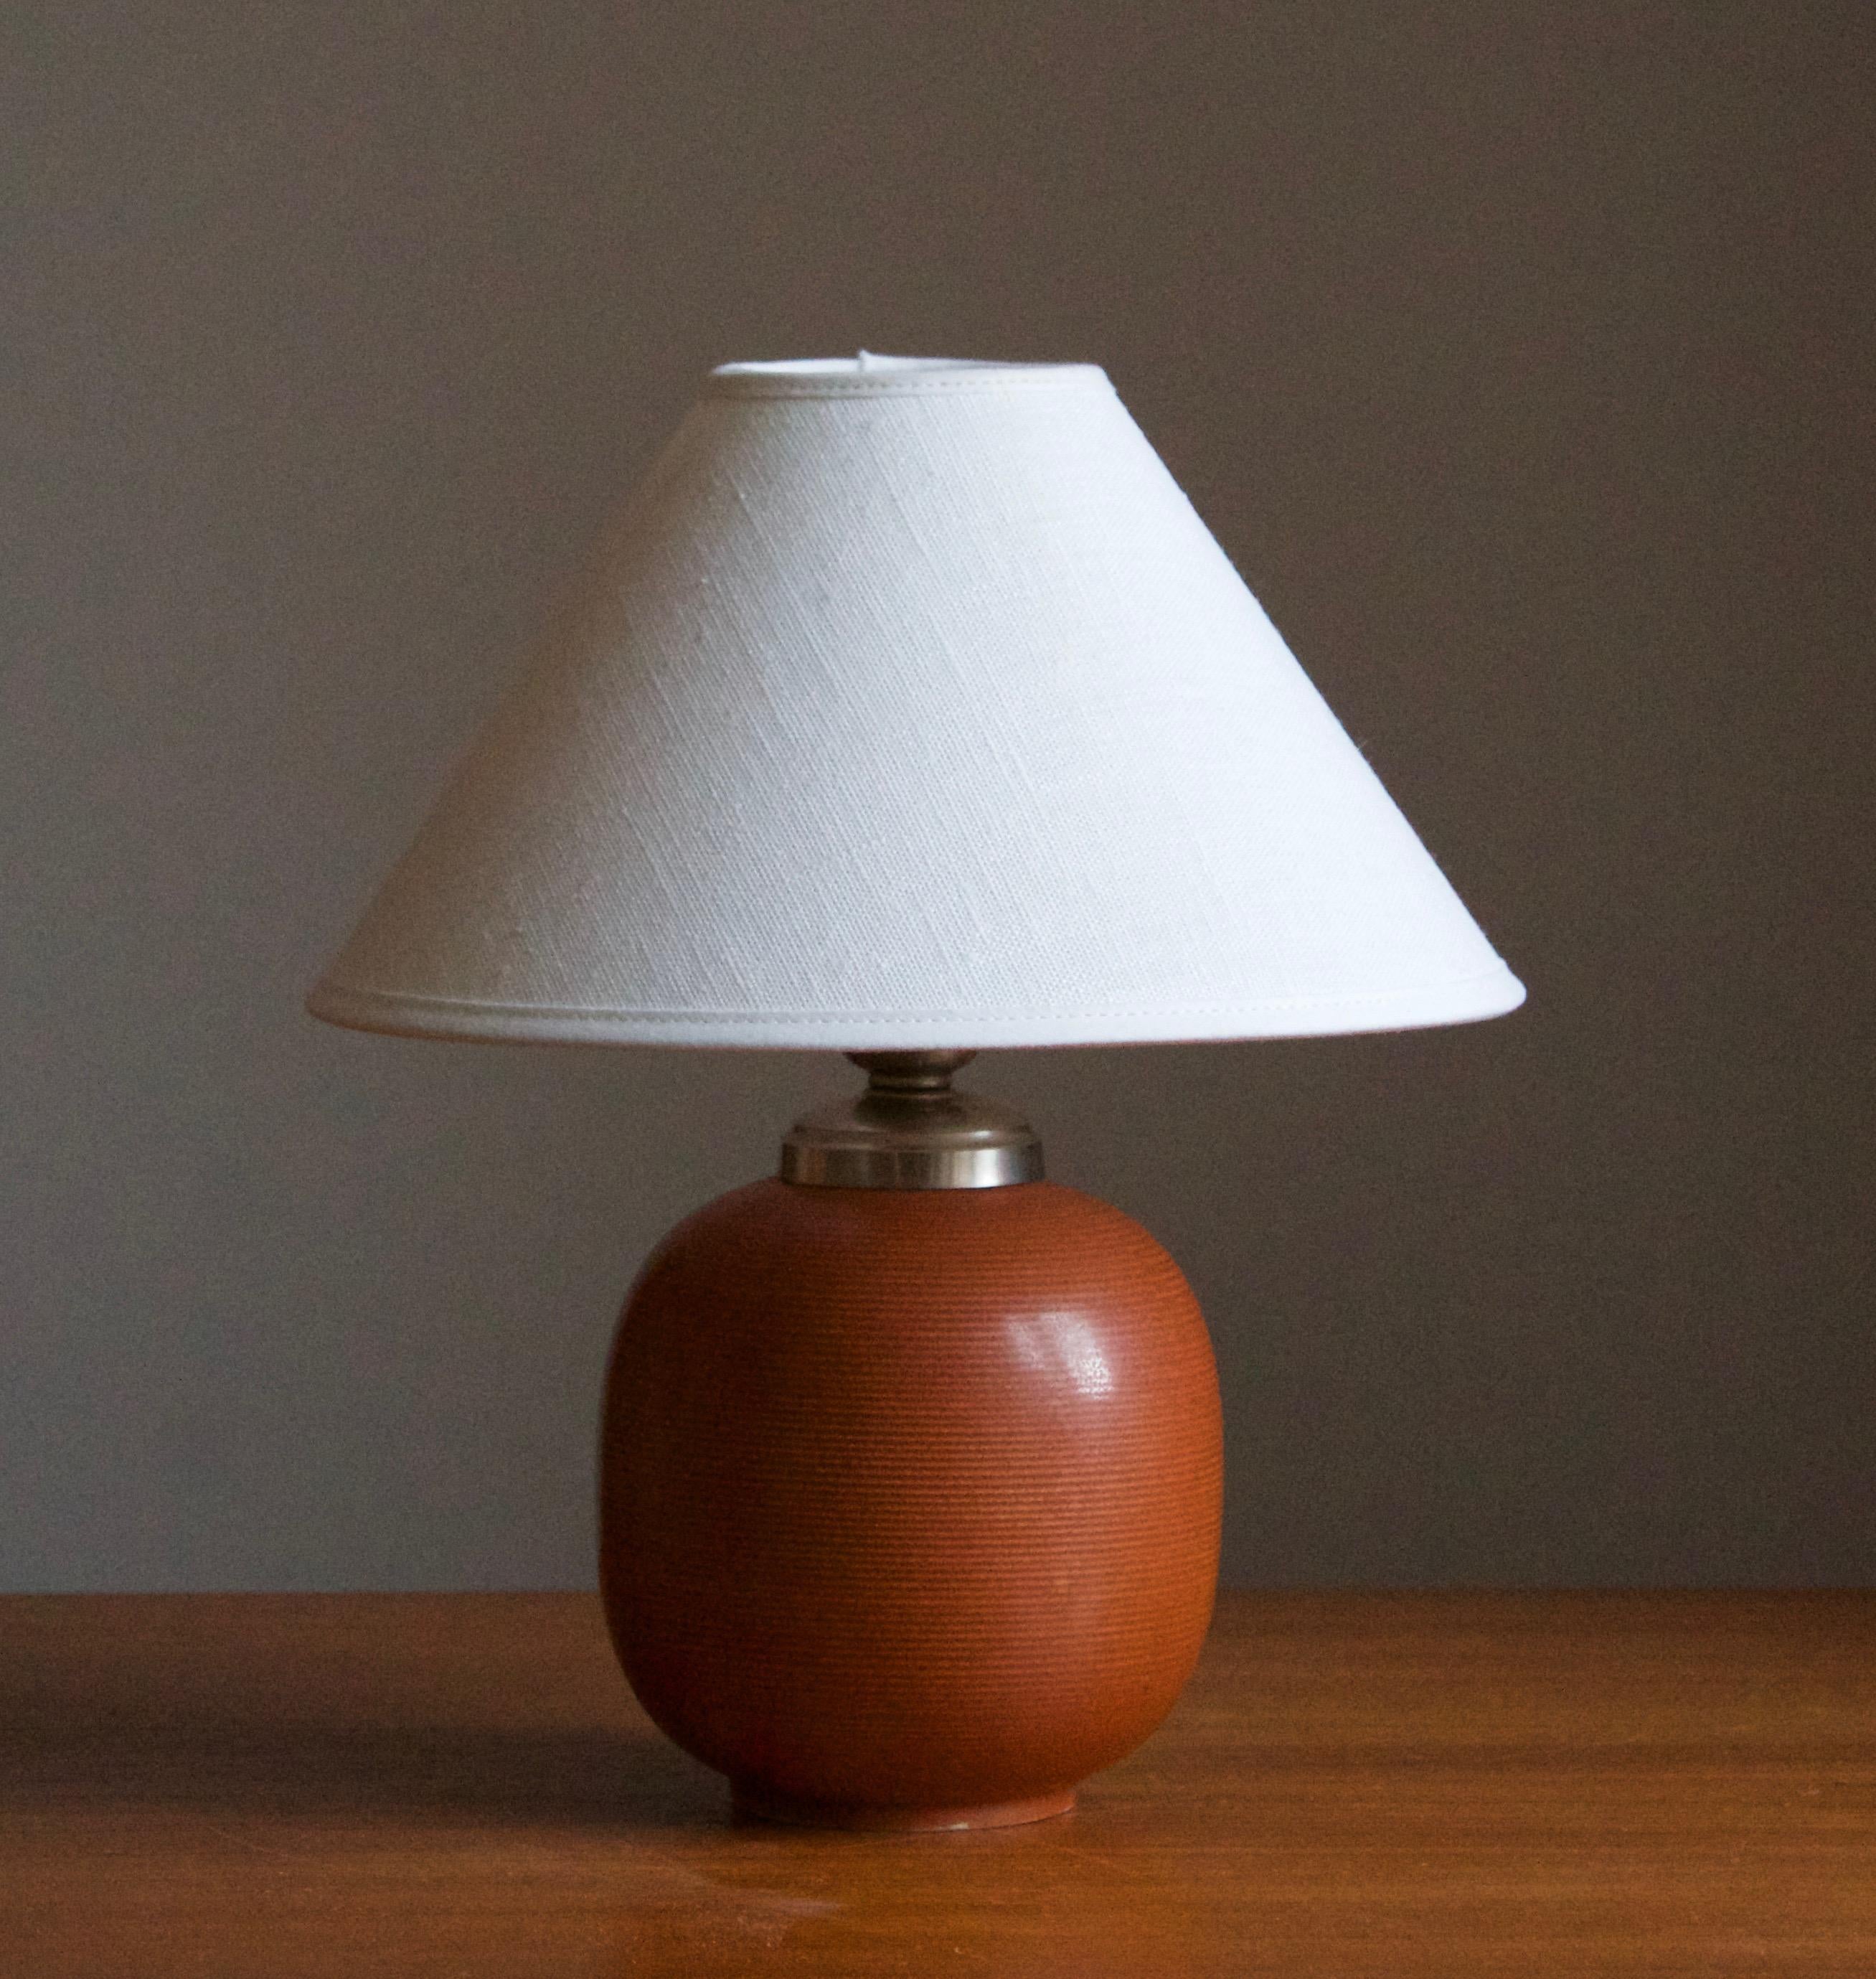 A large and impressive table lamp, designed by Gertrud Lönegren. Produced by Rörstrand. Stamped and with artists initials.

Stated dimensions excluding lampshade. Height includes socket. Sold without lampshade.

Glaze features an orange-brown